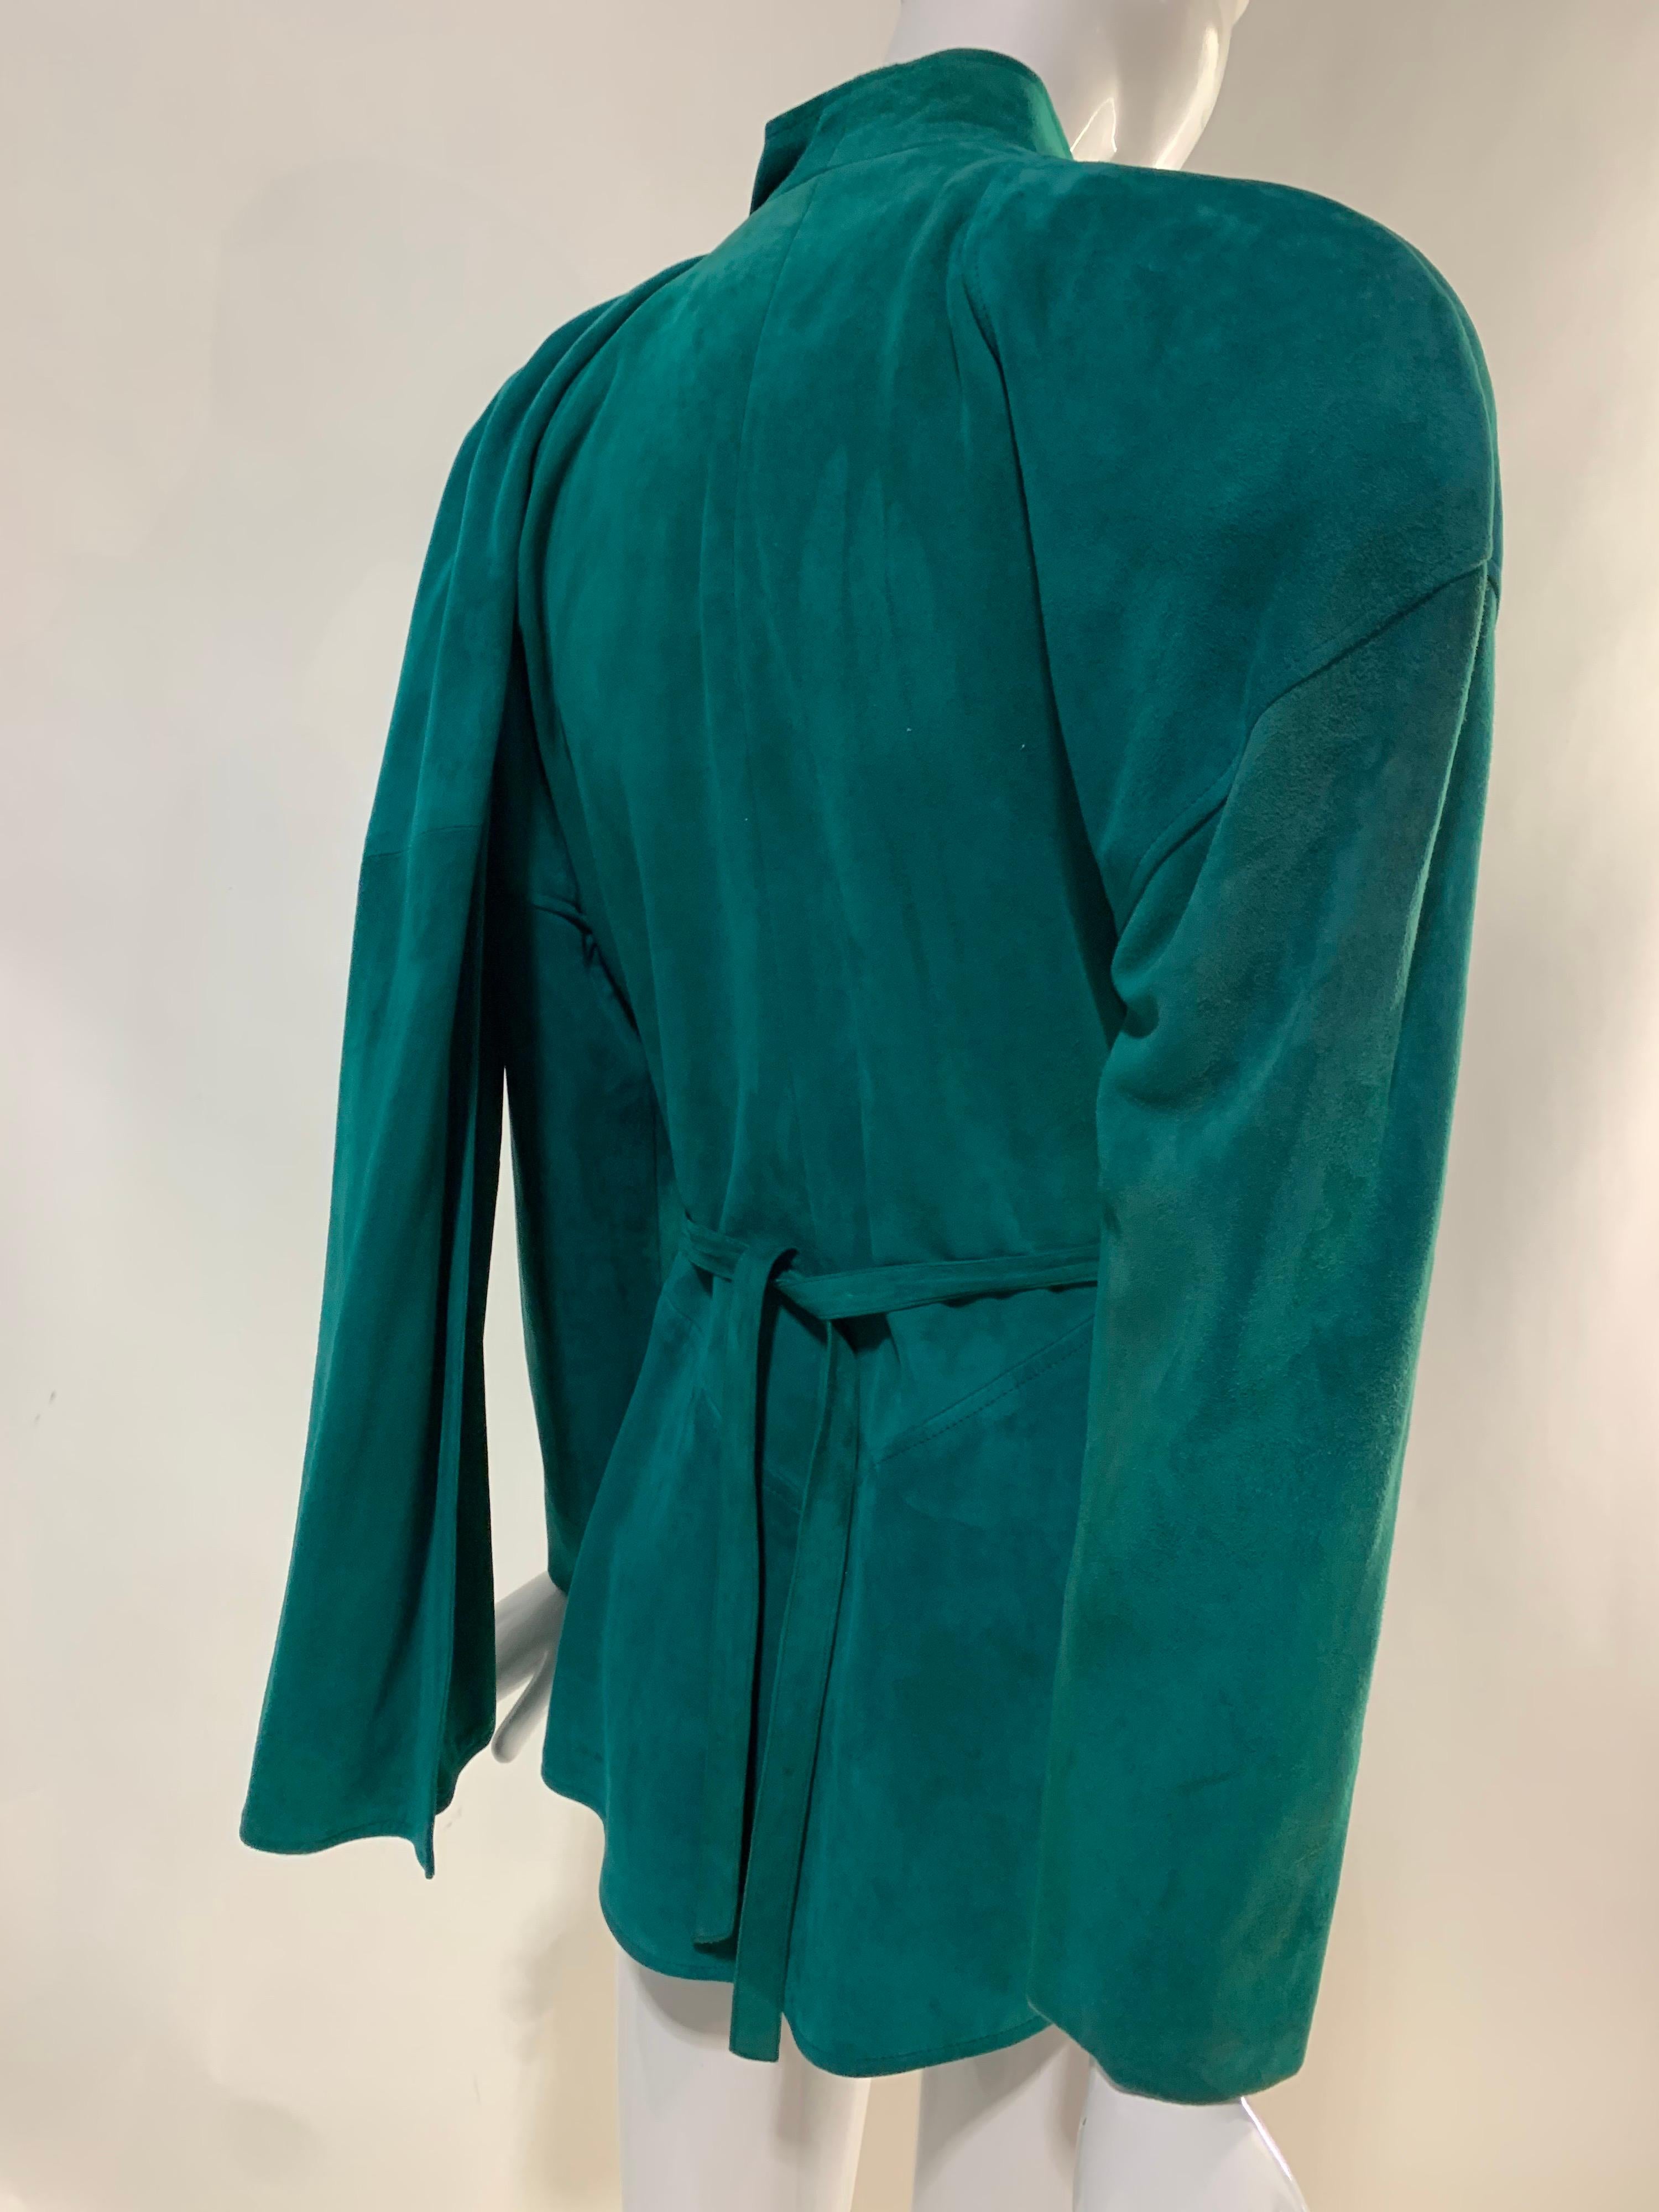 1980s Jean Claude Jitrois Emerald Suede Jacket w/ Gathered Front & Large Foulard For Sale 1